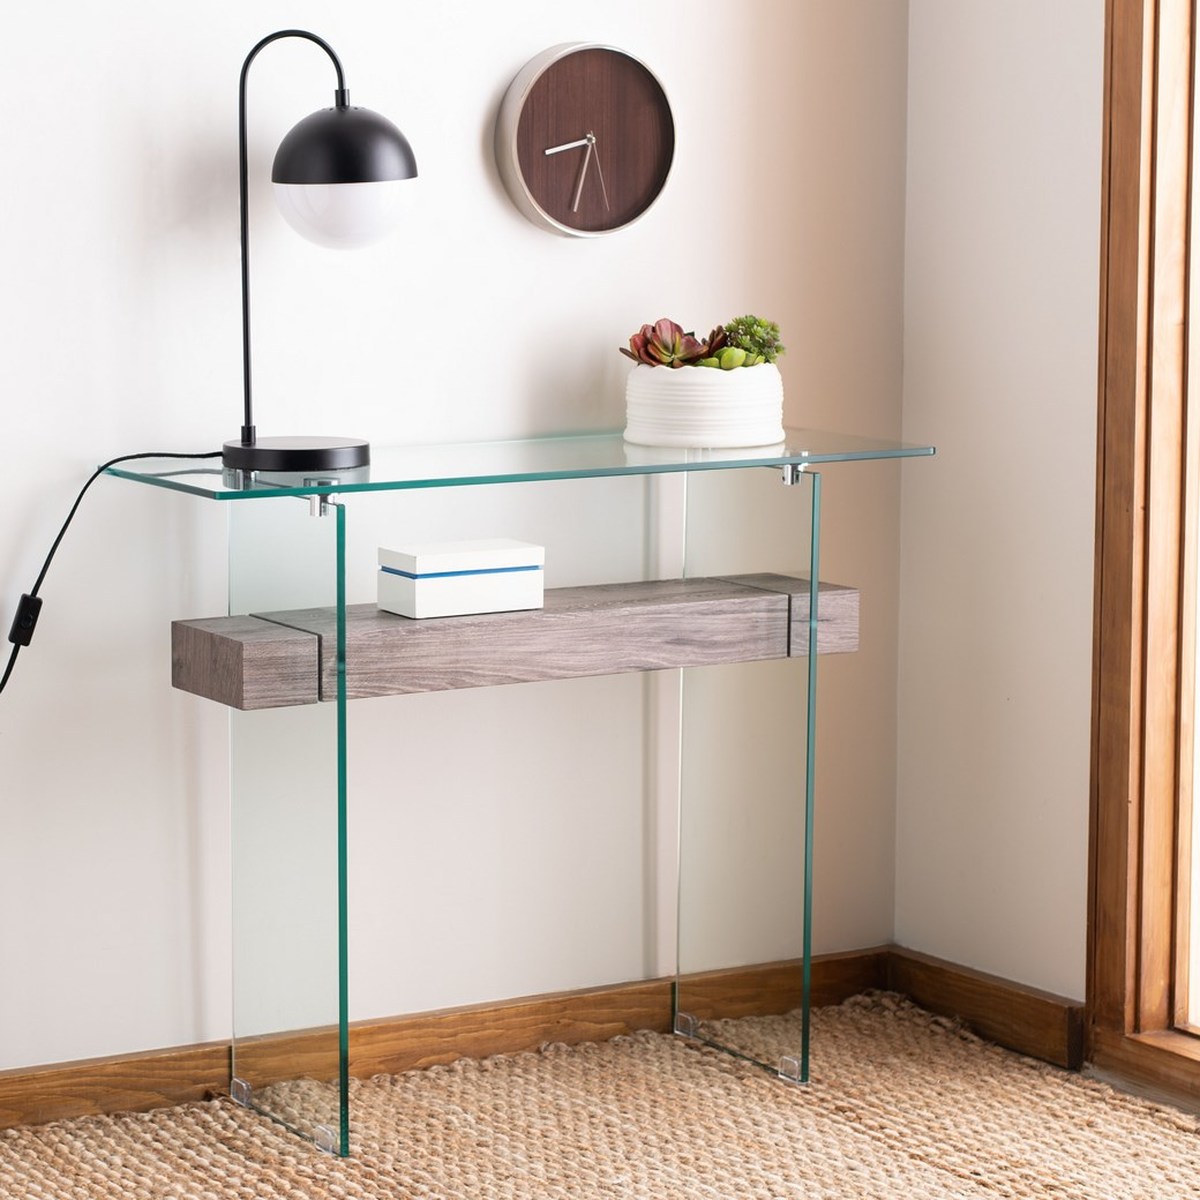 12 Best Narrow Console Table Options for Small Spaces - VIV & TIM